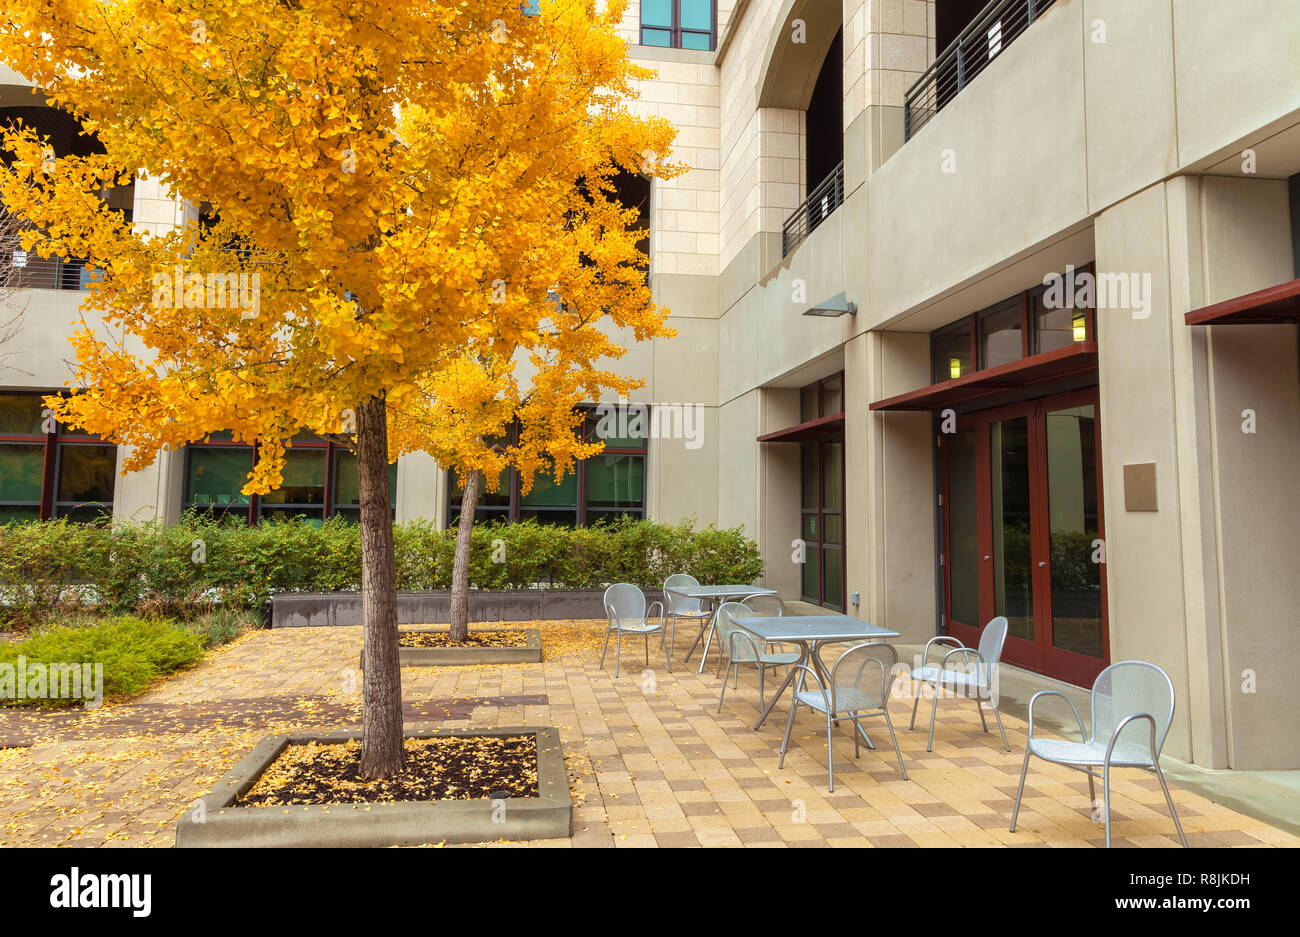 Stanford University campus with the ginkgo tree in its fall foliage, Palo Alto, California, United States. Stock Photo